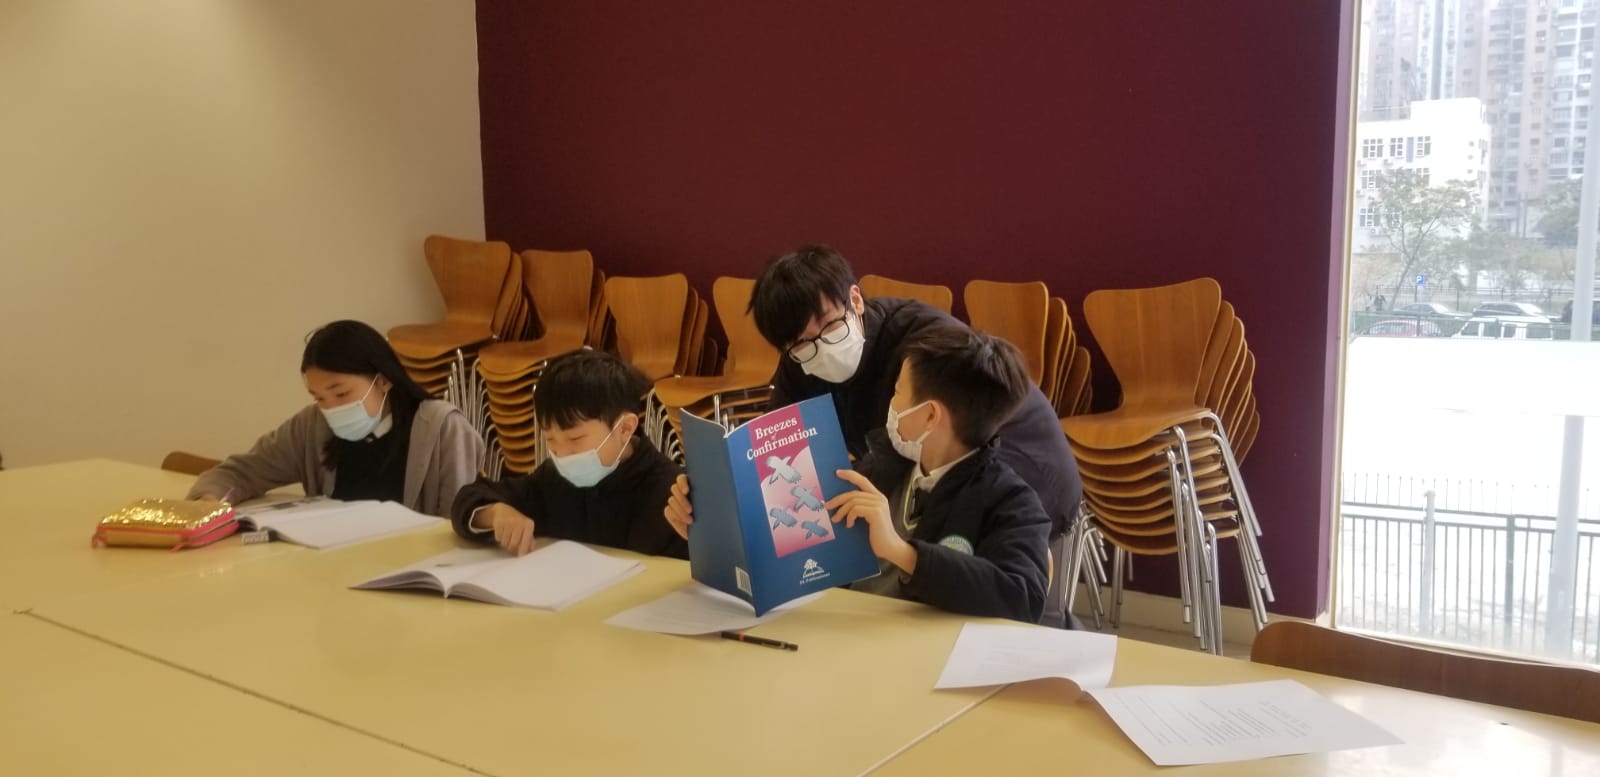 Three students reading a textbook while their teacher helps one of them. 